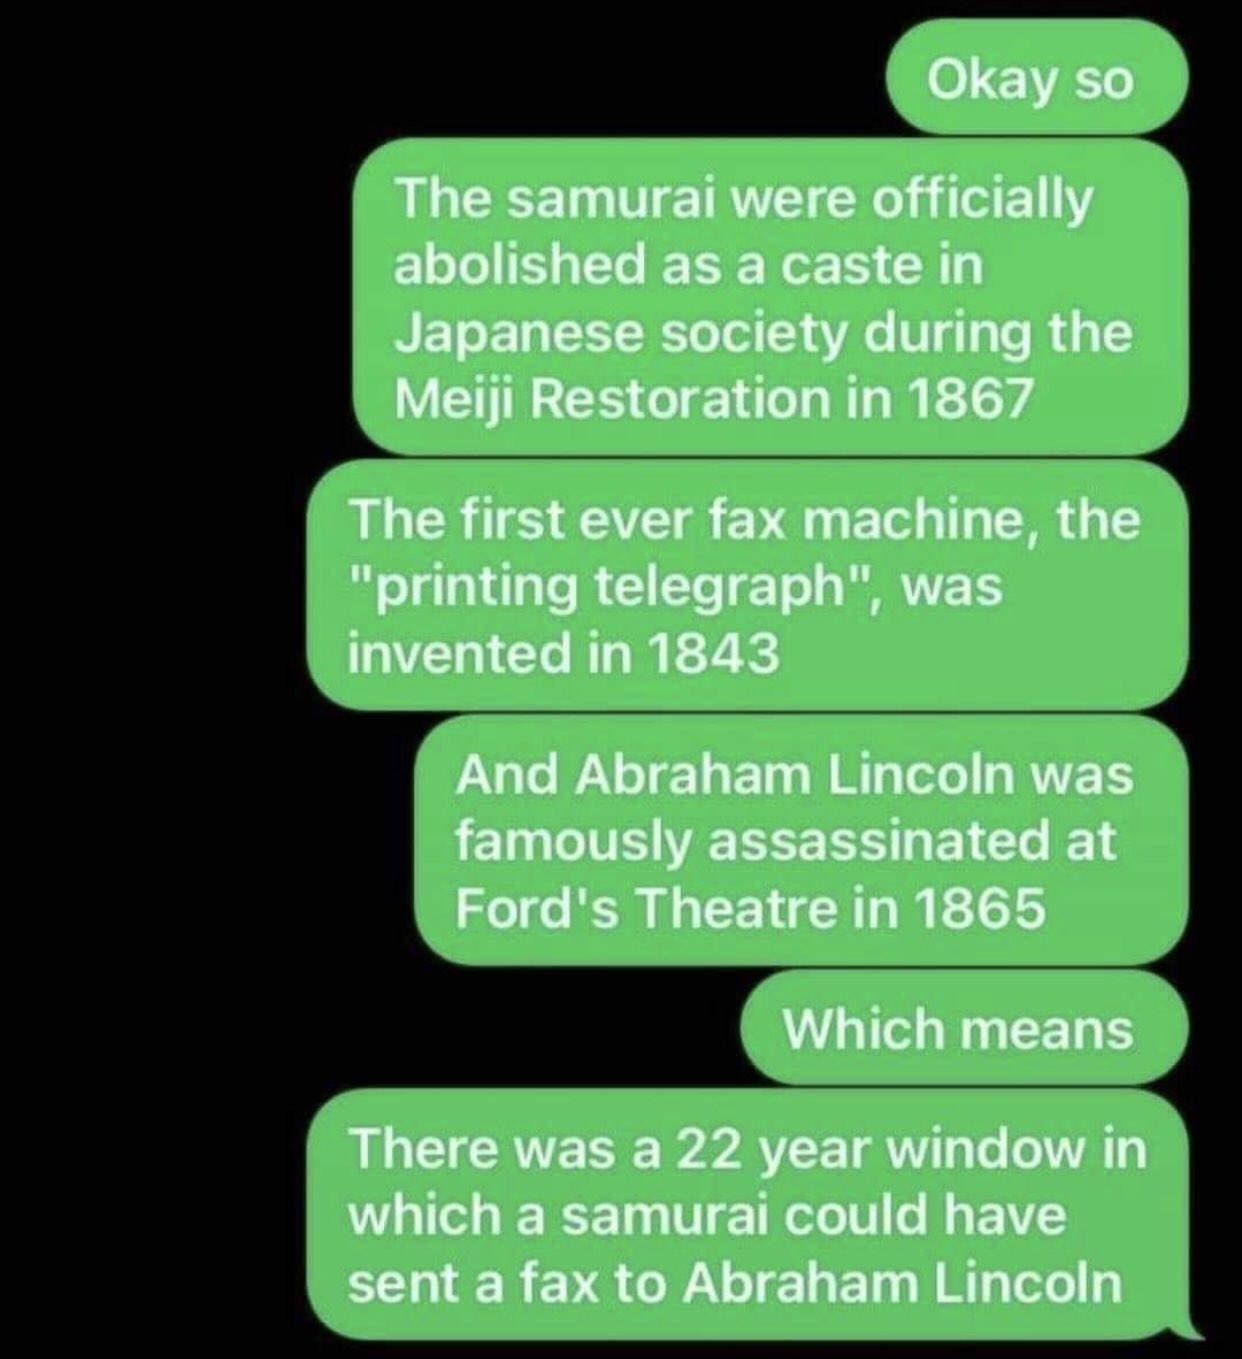 A text message explaining how samurai existed in 1867, the first fax machine was invented in 1943, and Lincoln was assassinated in 1865, so there was a 22-year window in which a samurai could have faxed Lincoln